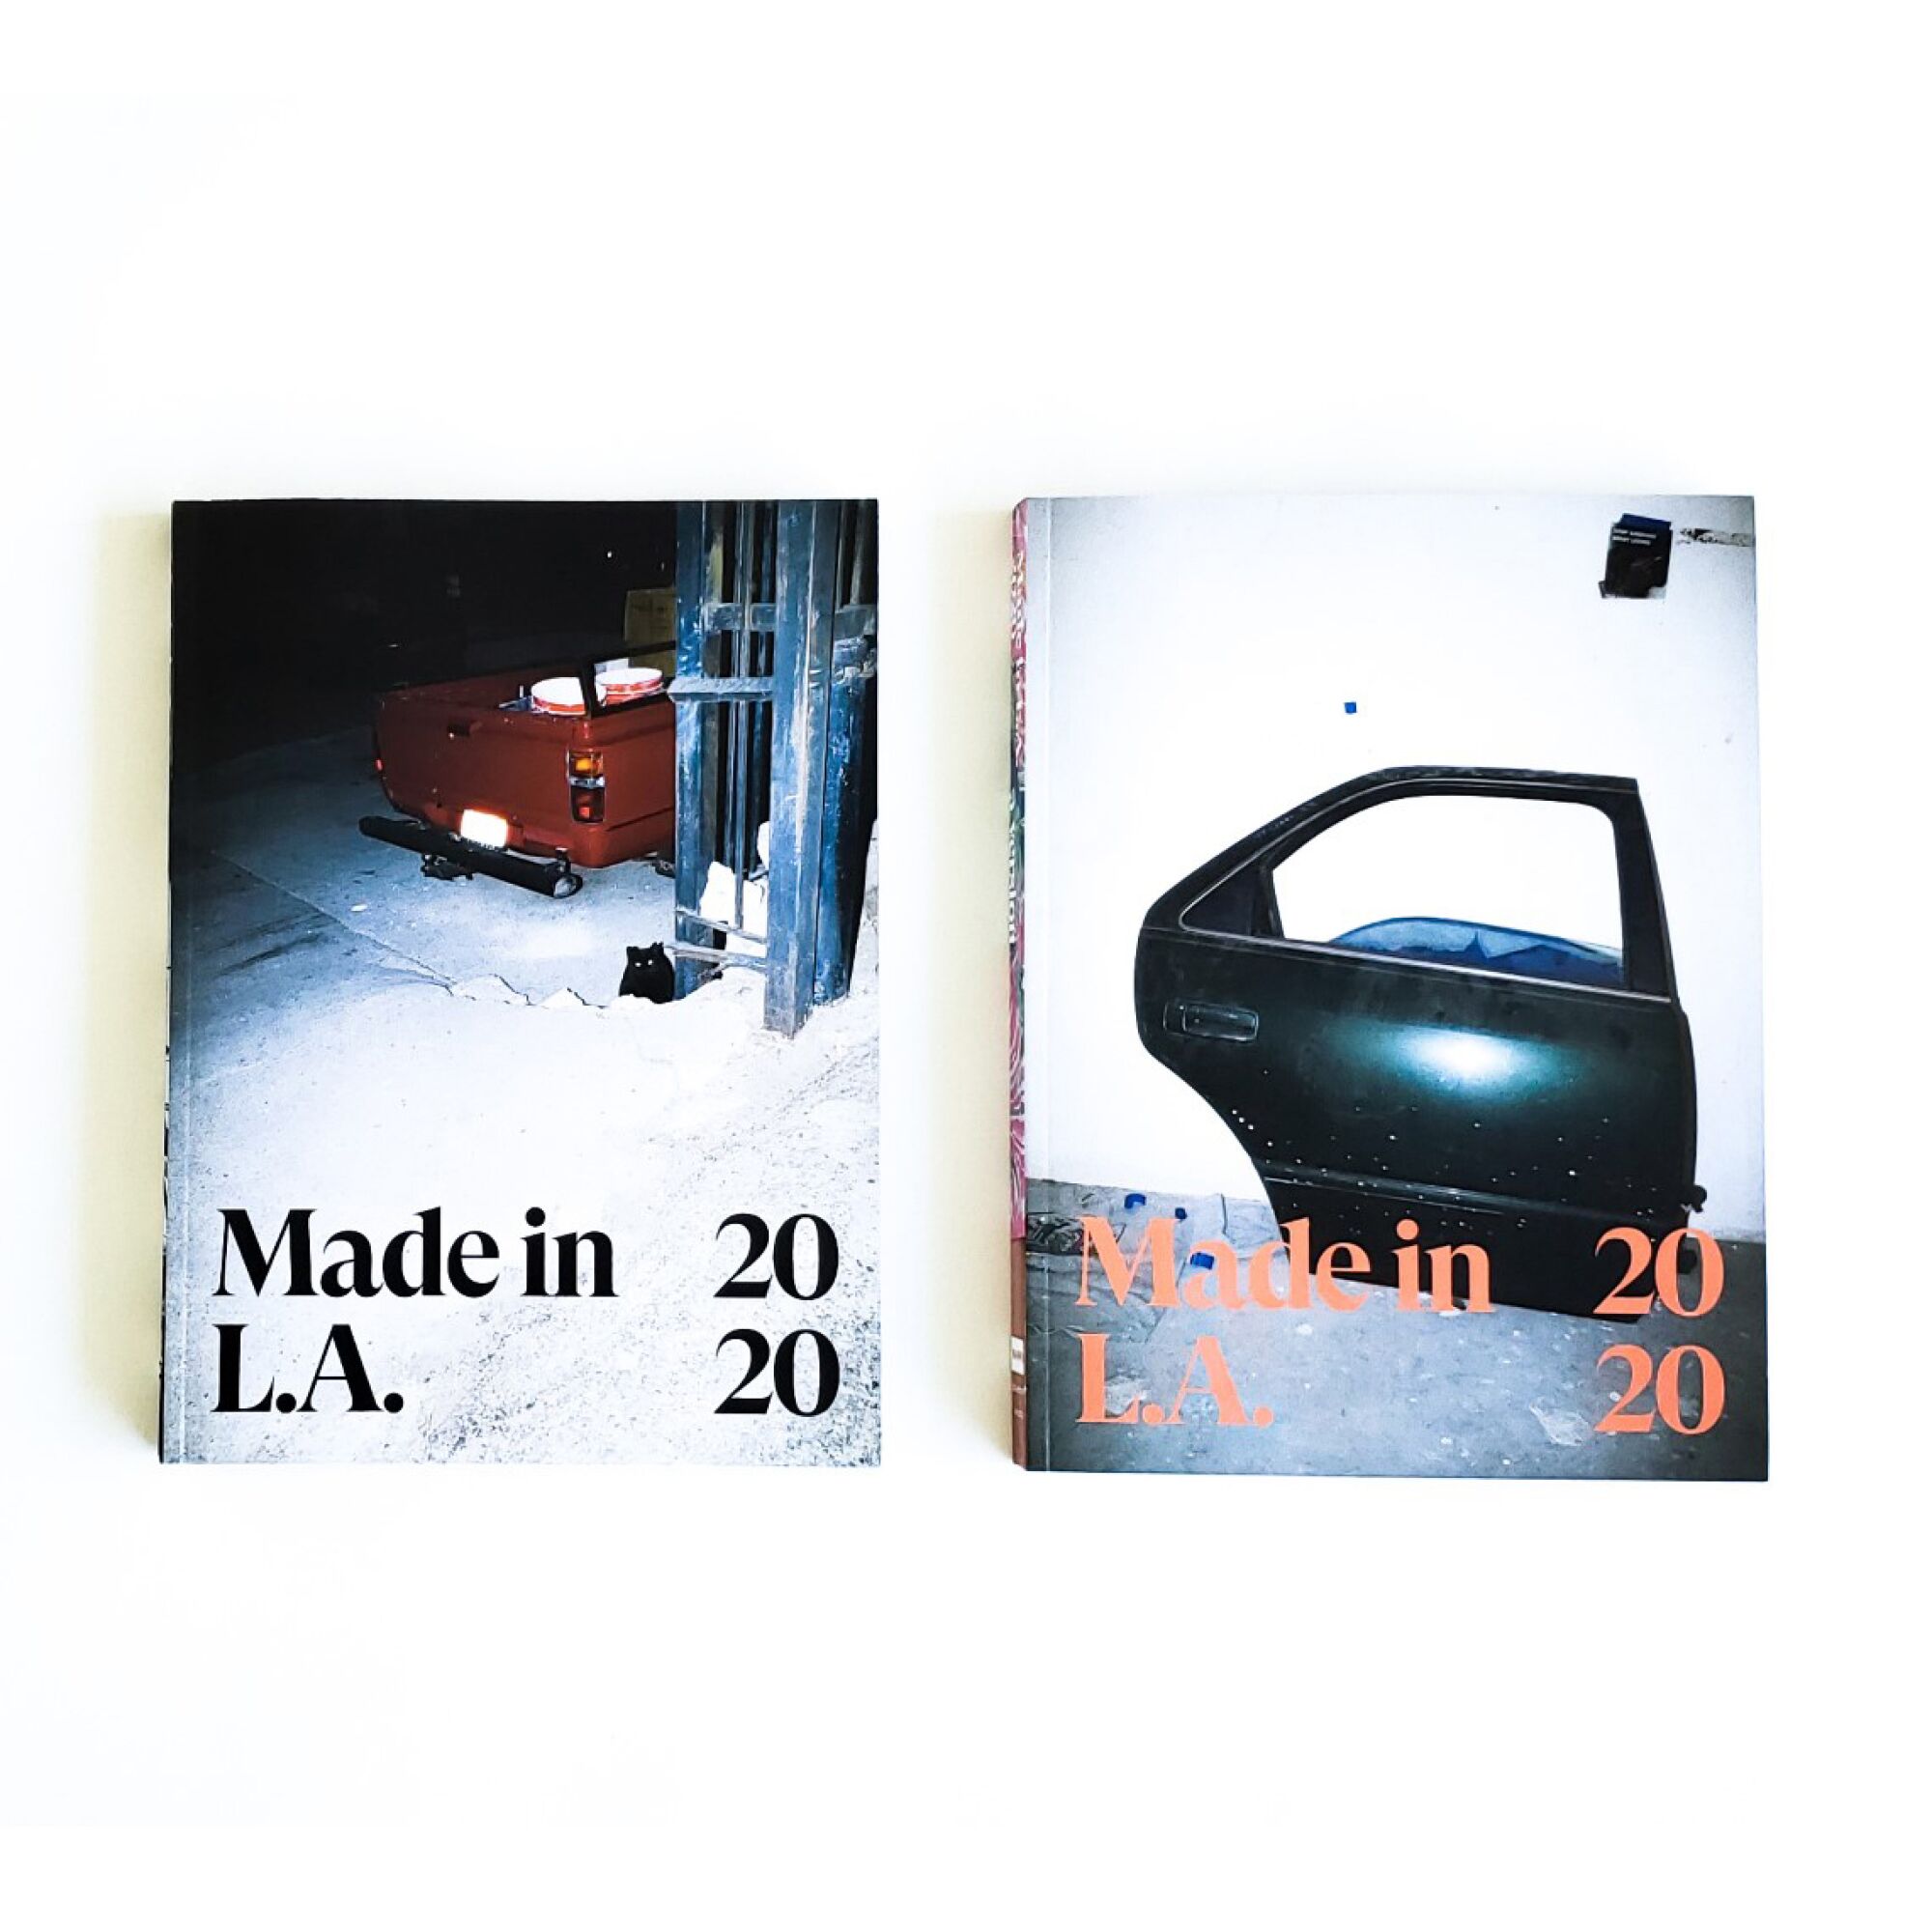 The Hammer Museum's "Made in L.A. 2020: A Version" art book